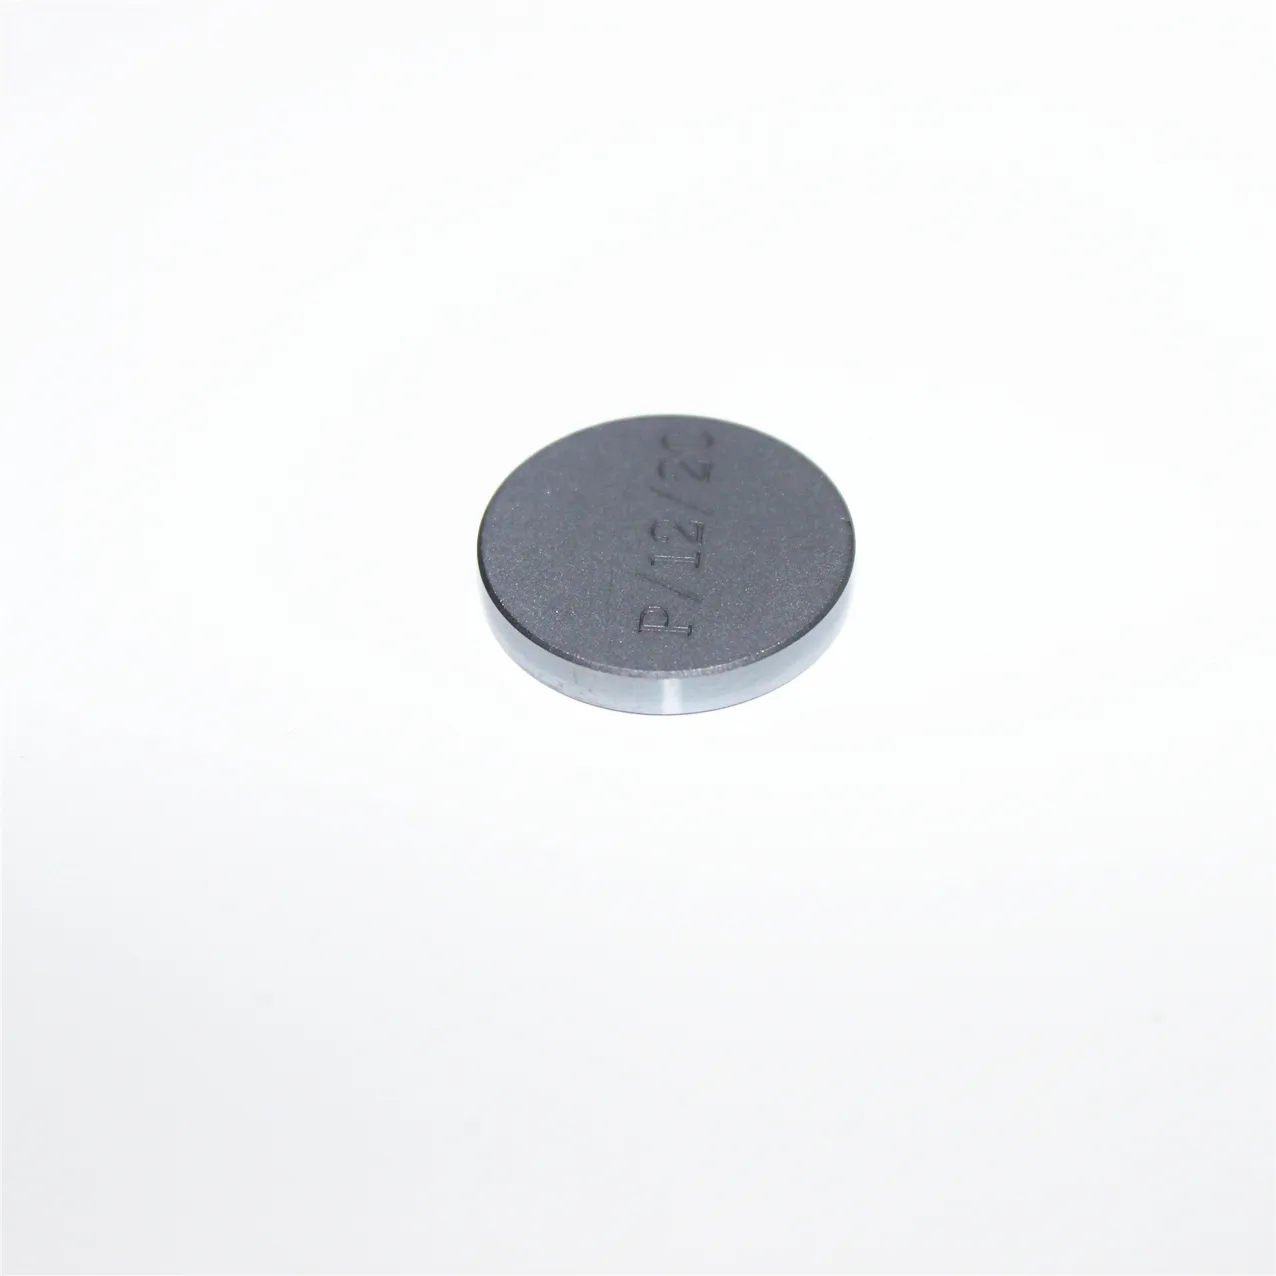 Silicon Wafer Custom double side polished SiC Wafer Substrate 2'' 3'' 4'' 6''